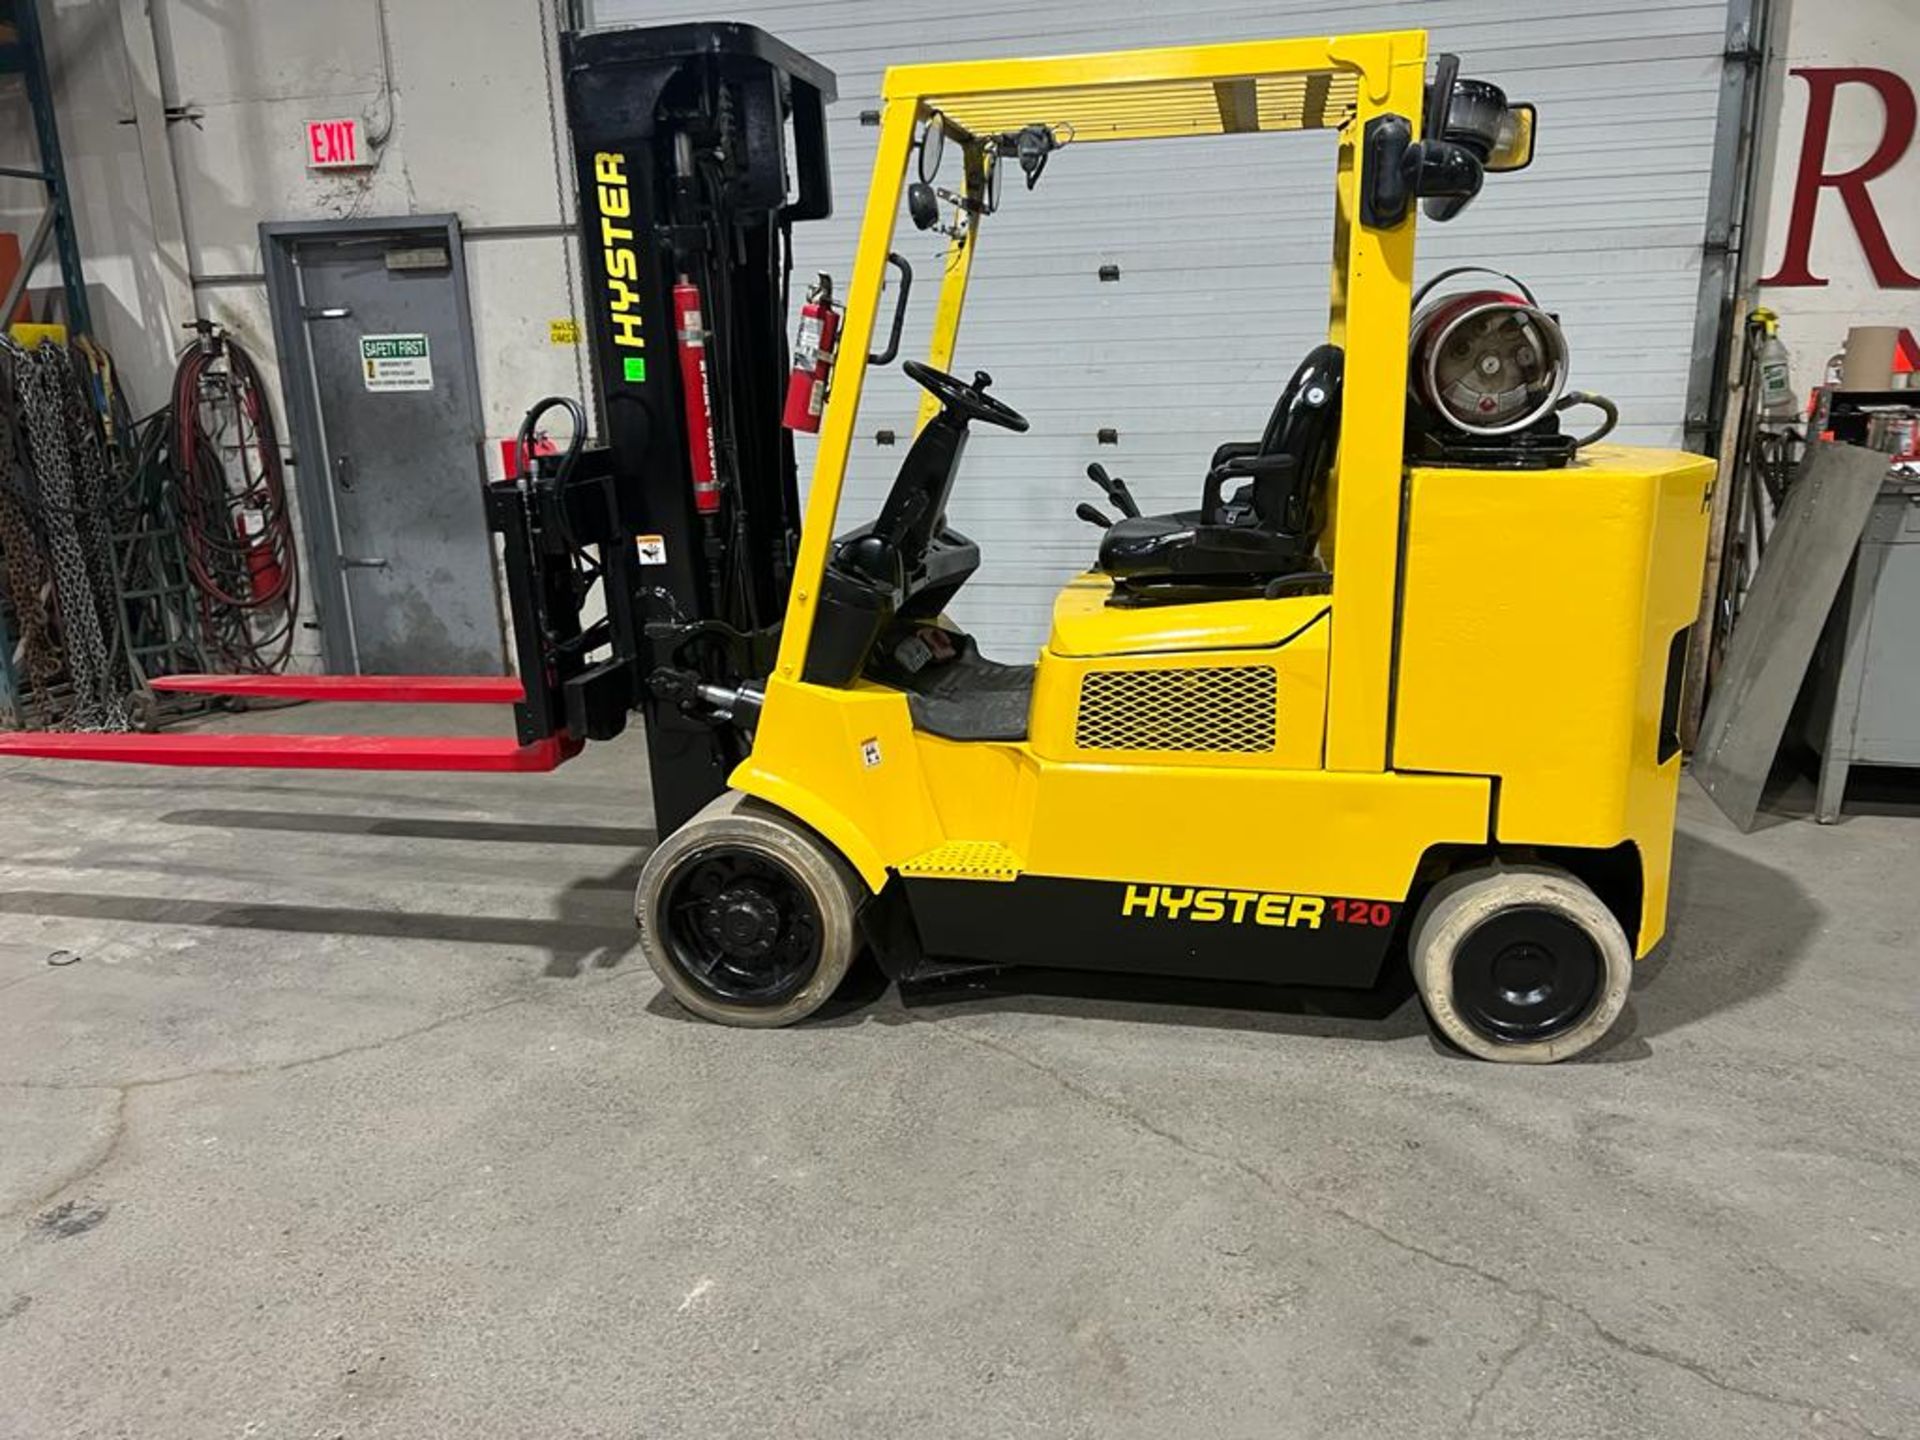 NICE Hyster 12,000lbs Capacity Forklift NEW 72" Forks Box Car Special LPG (Propane)